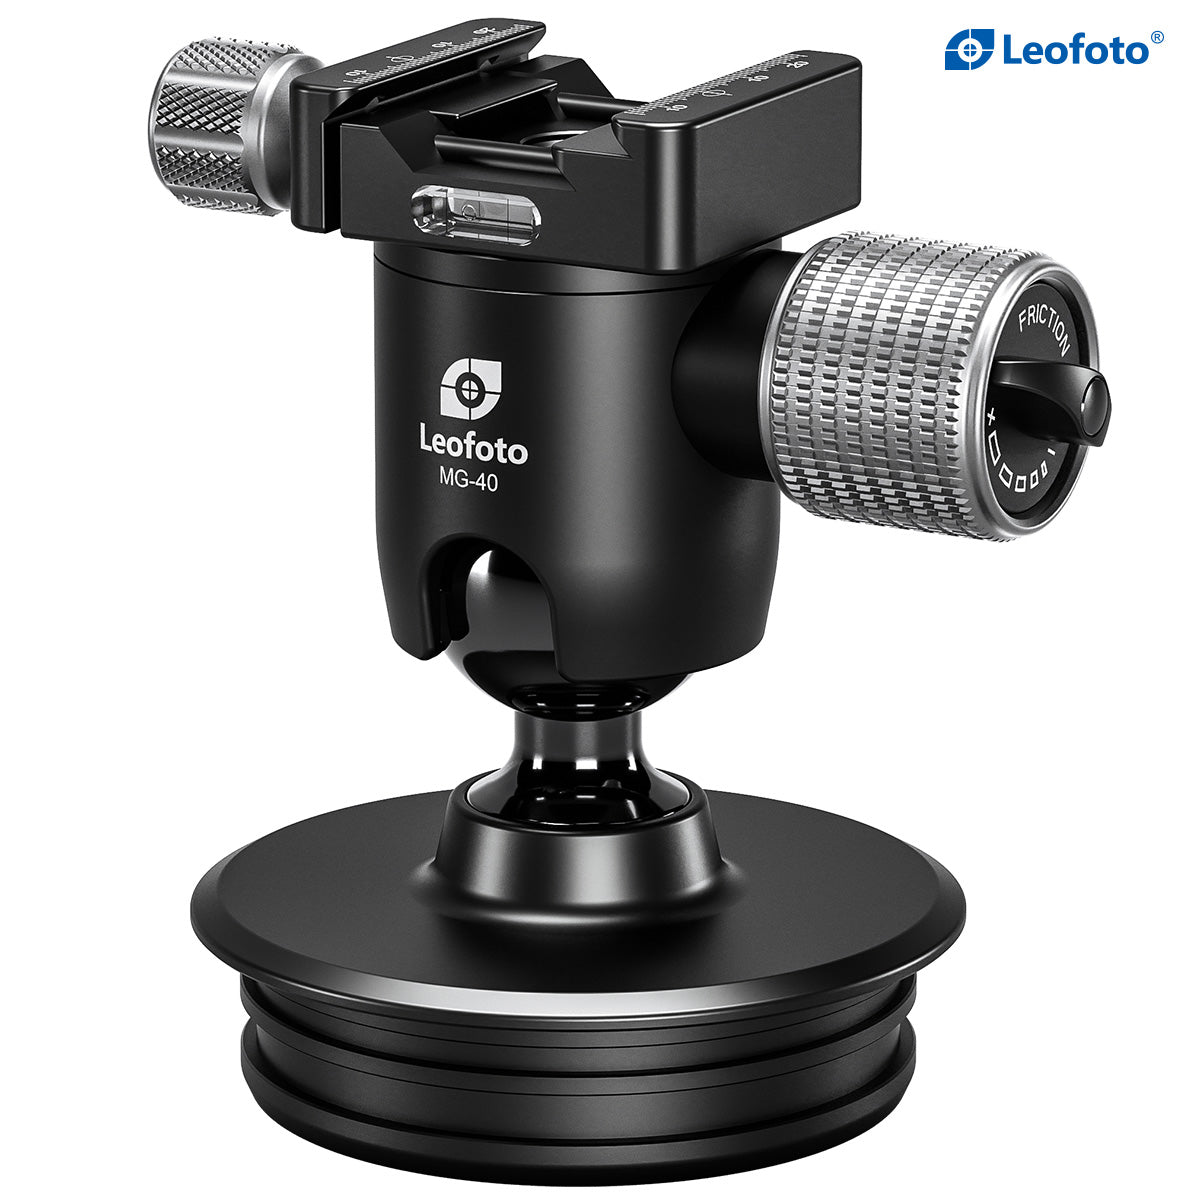 Leofoto MAB-100G Precision-Lock Outdoors Ball Head with Bowl Adapter for 100mm